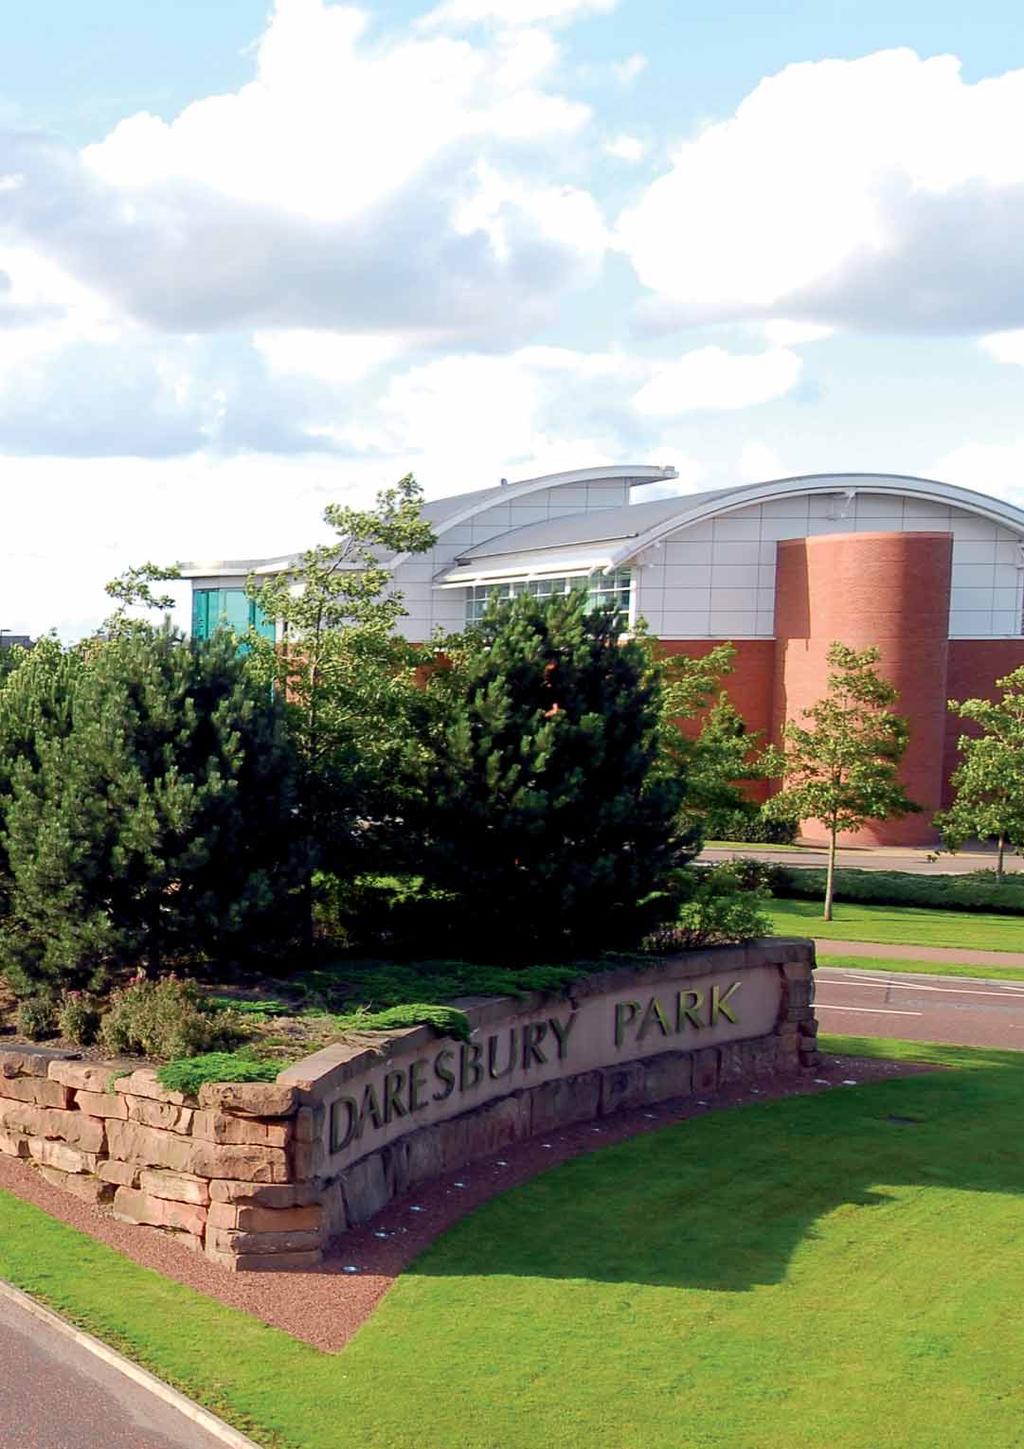 Daresbury Park, a Business Park located on junction 11 of the M56, two junctions from the M6 close to Liverpool, Manchester, Chester and Warrington.